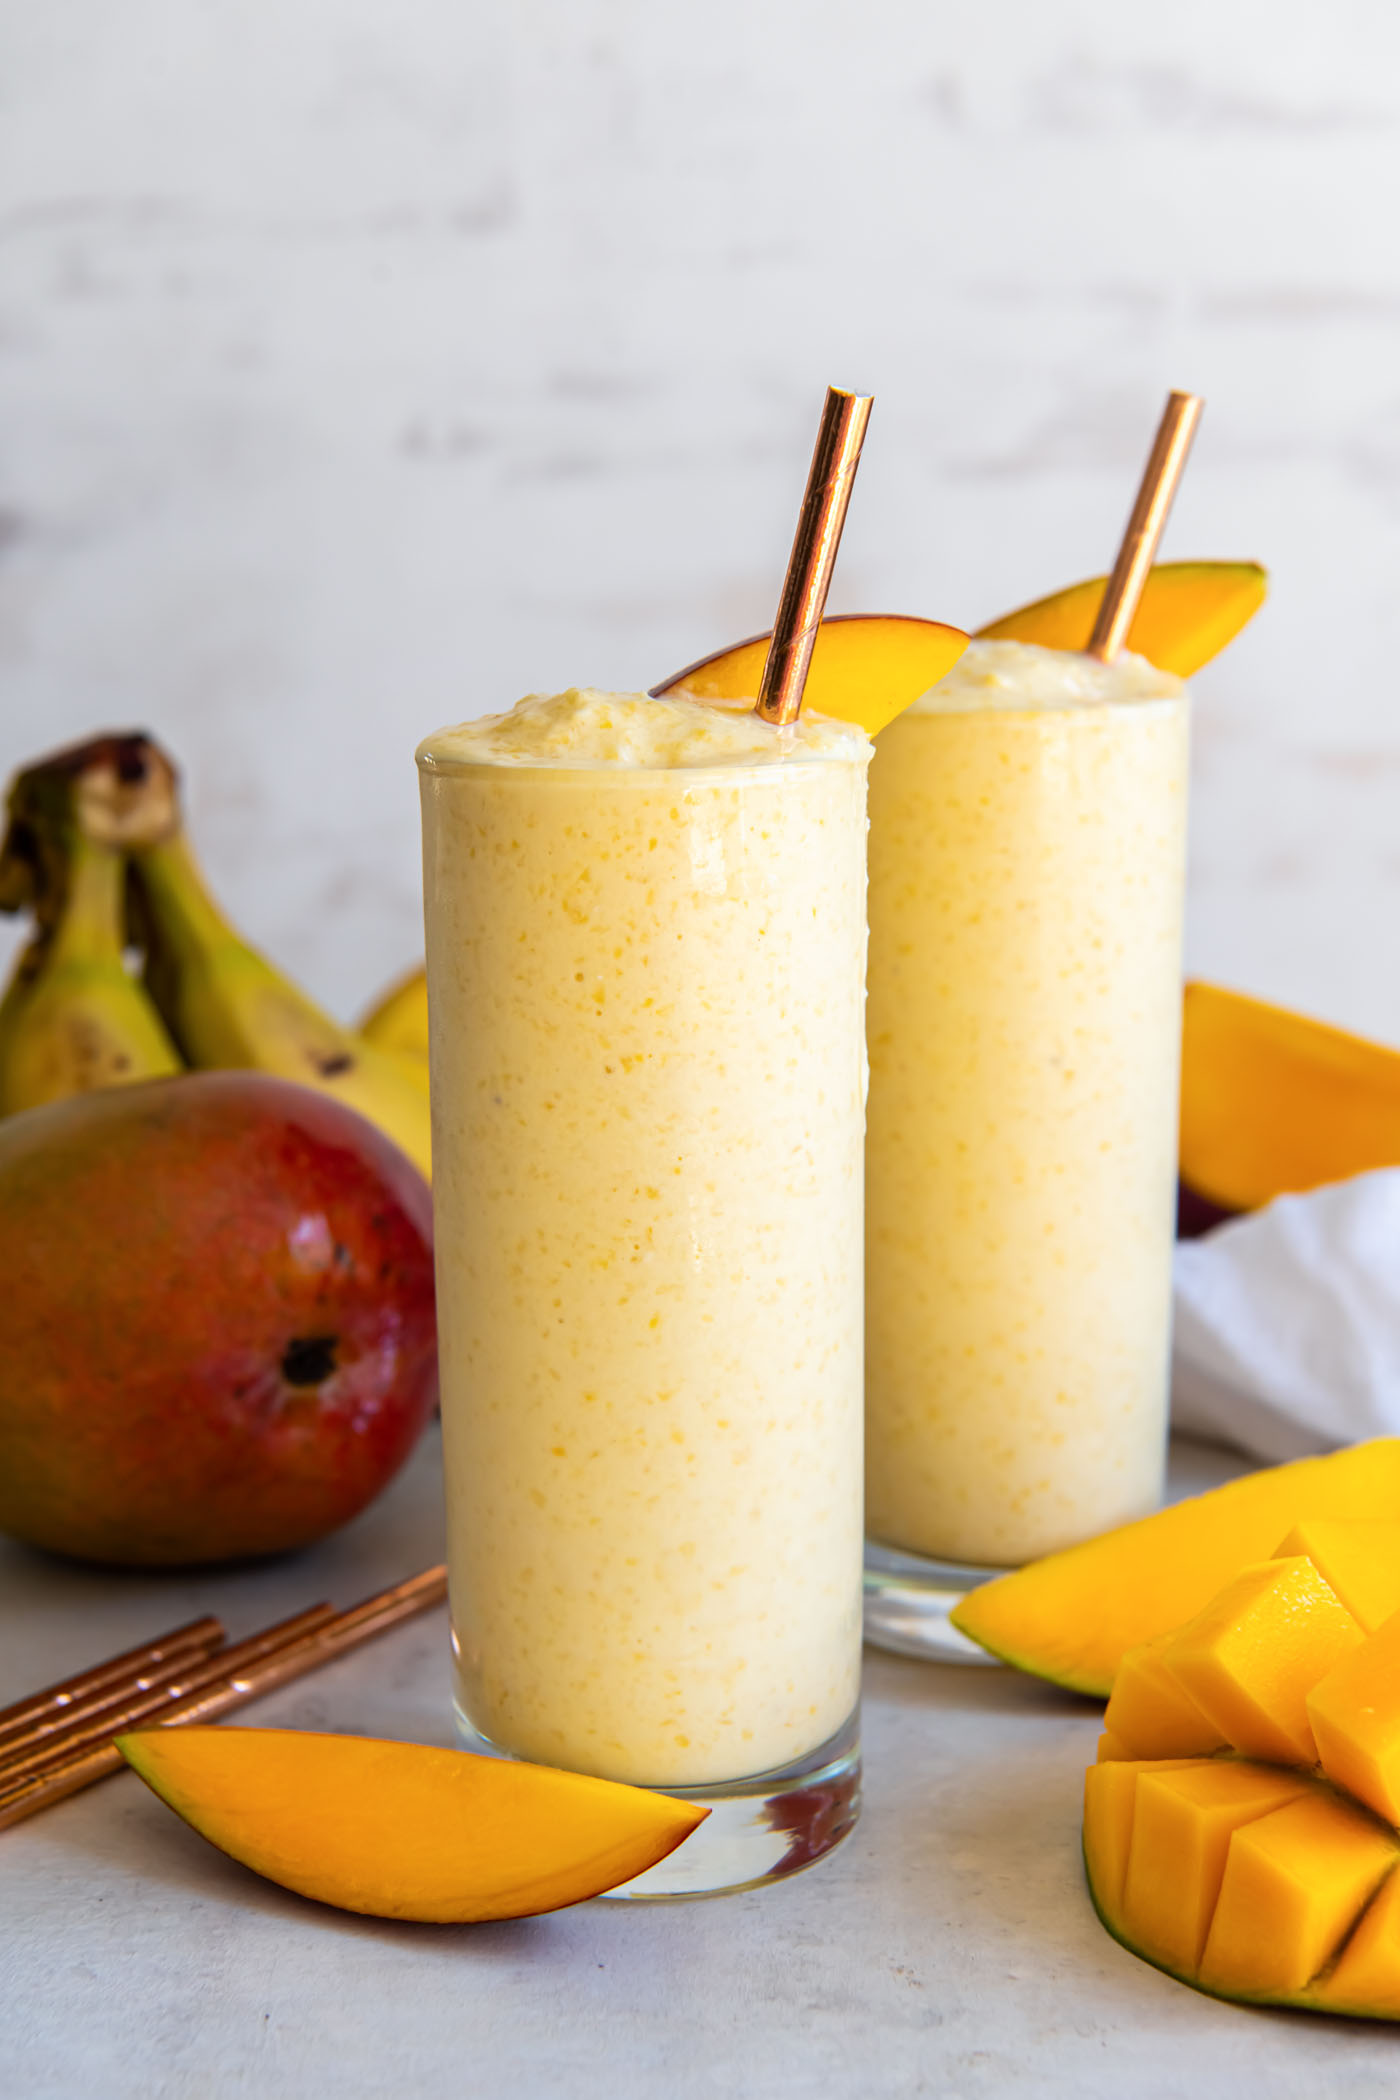 Mango smoothie served in two tall glasses with mango slices and straws.